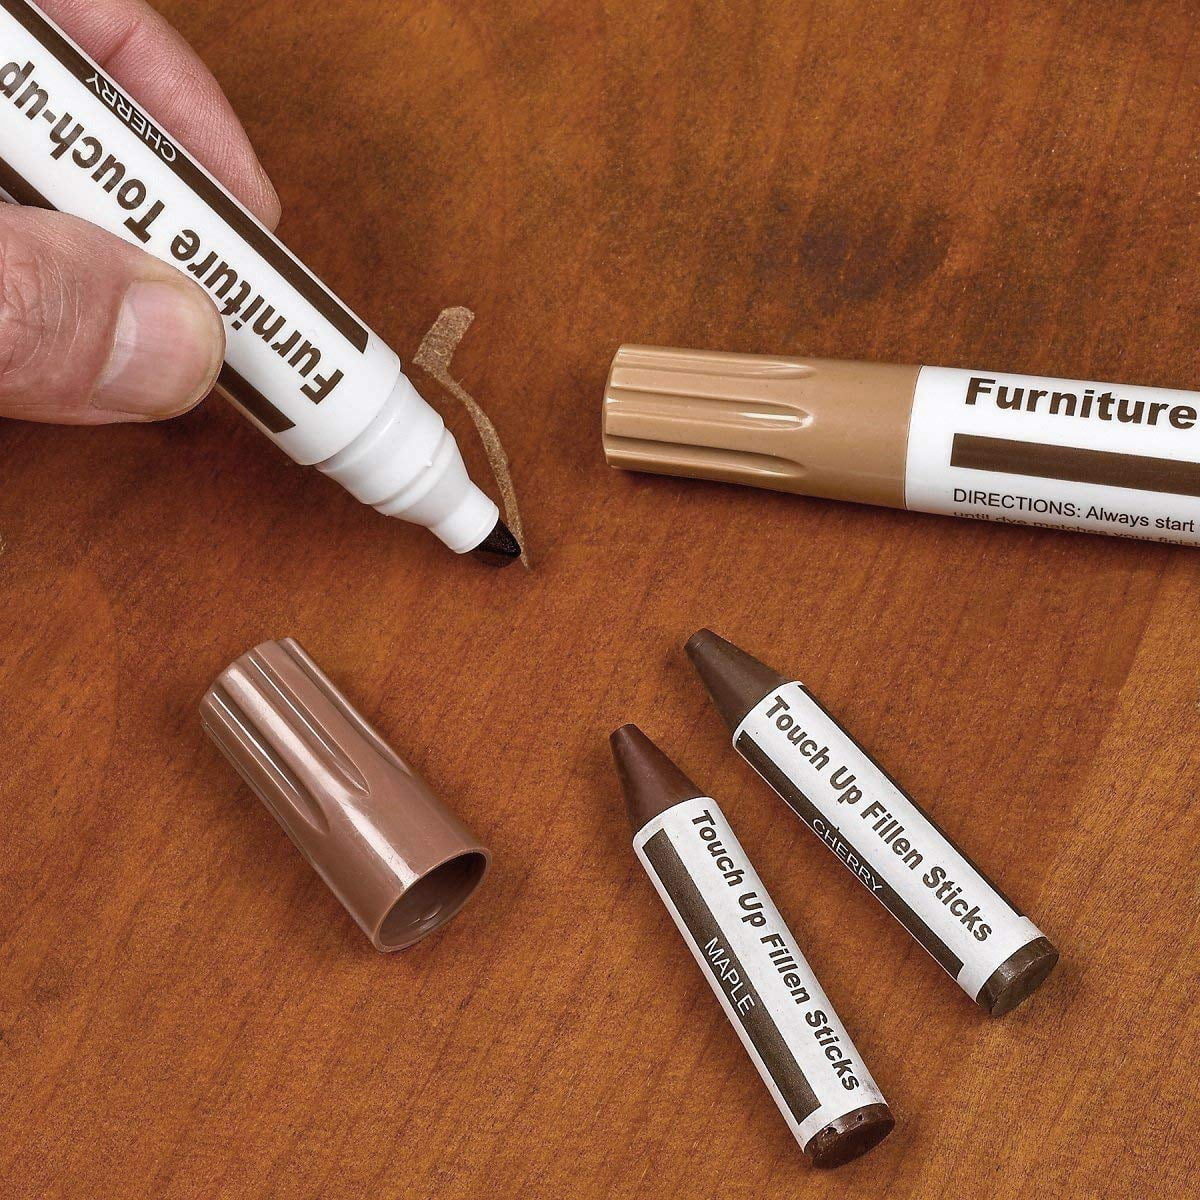 This set of furniture markers will change your life